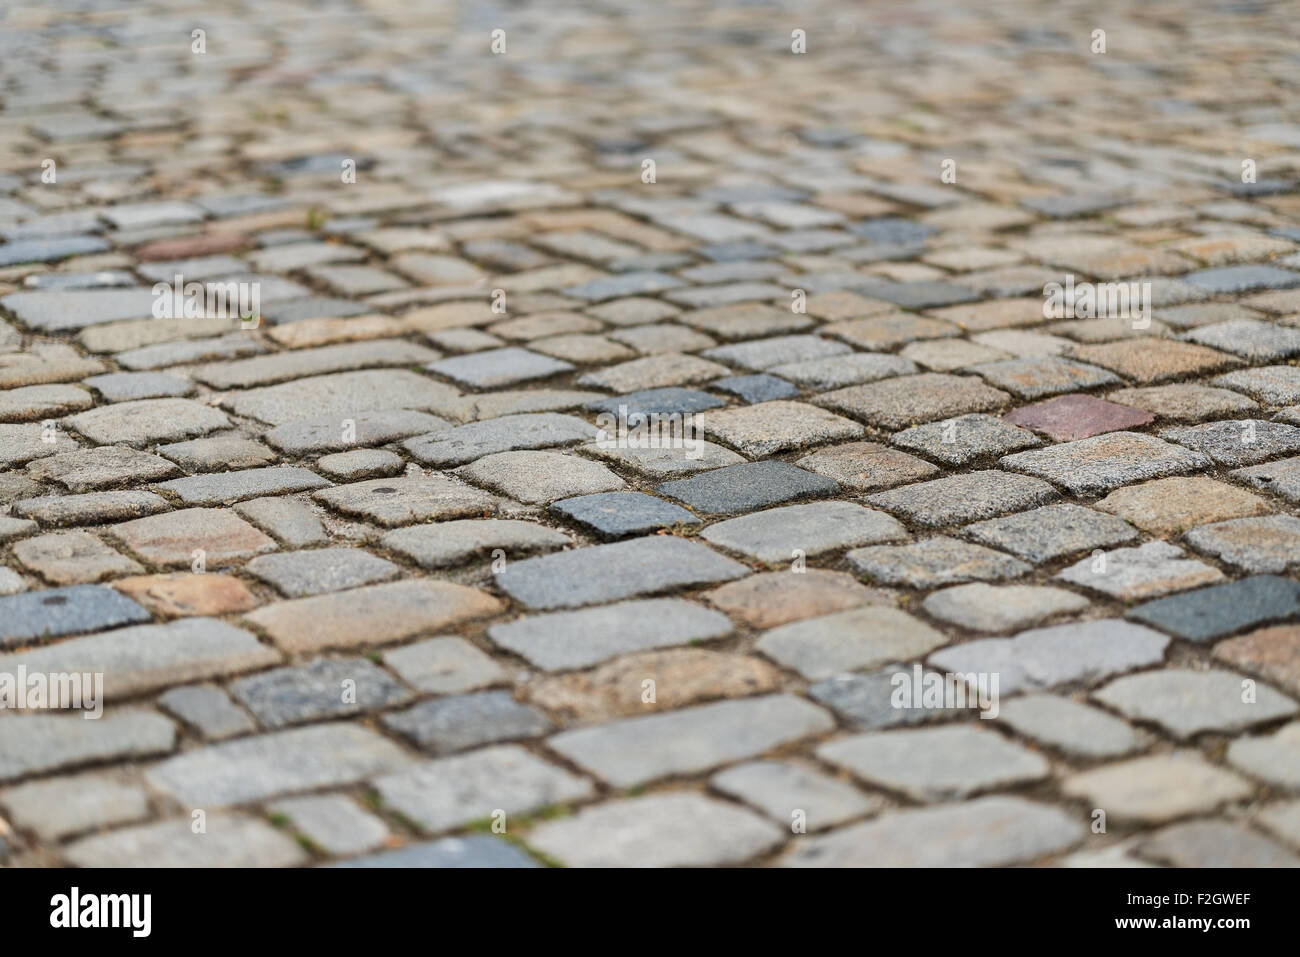 historic cobblestones, Straubing, Lower Bavaria, Town Square, Germany, Bavaria, stones hard gray, problems, on your mind, Relief Stock Photo